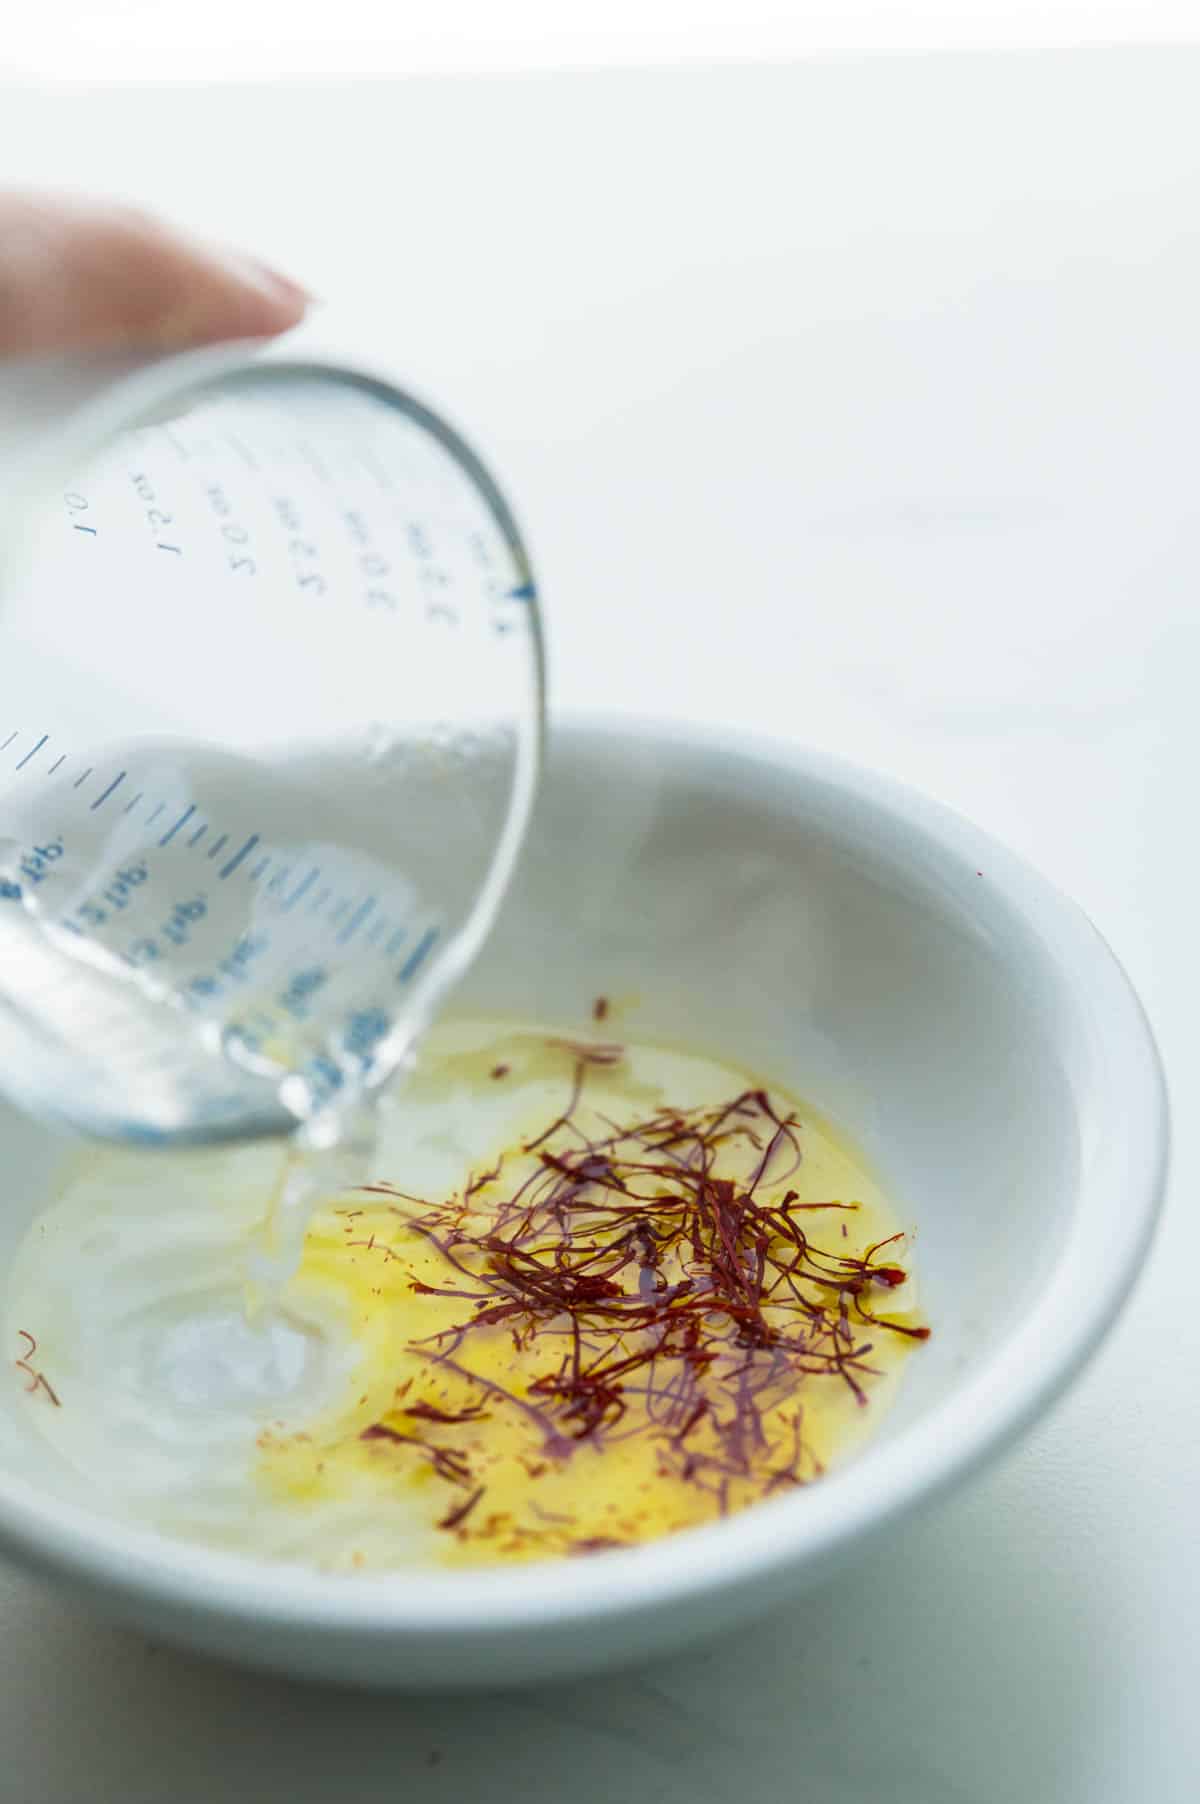 blooming the saffron with hot water.